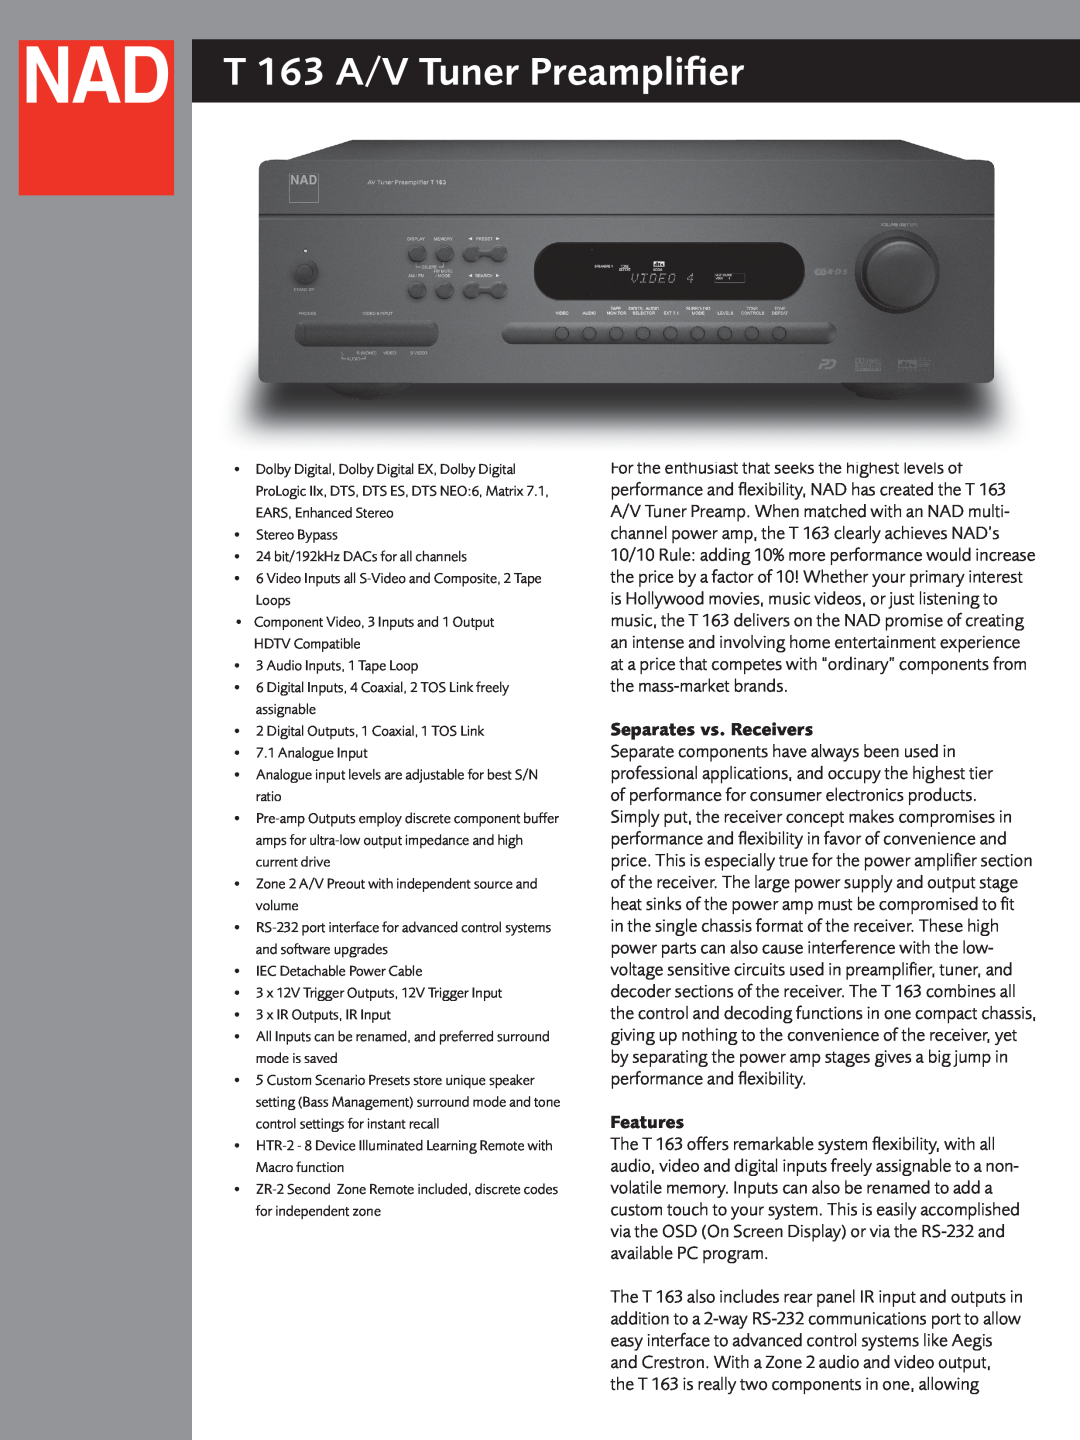 NAD T163 manual Separates vs. Receivers, Features, T 163 A/V Tuner Preampliﬁer 